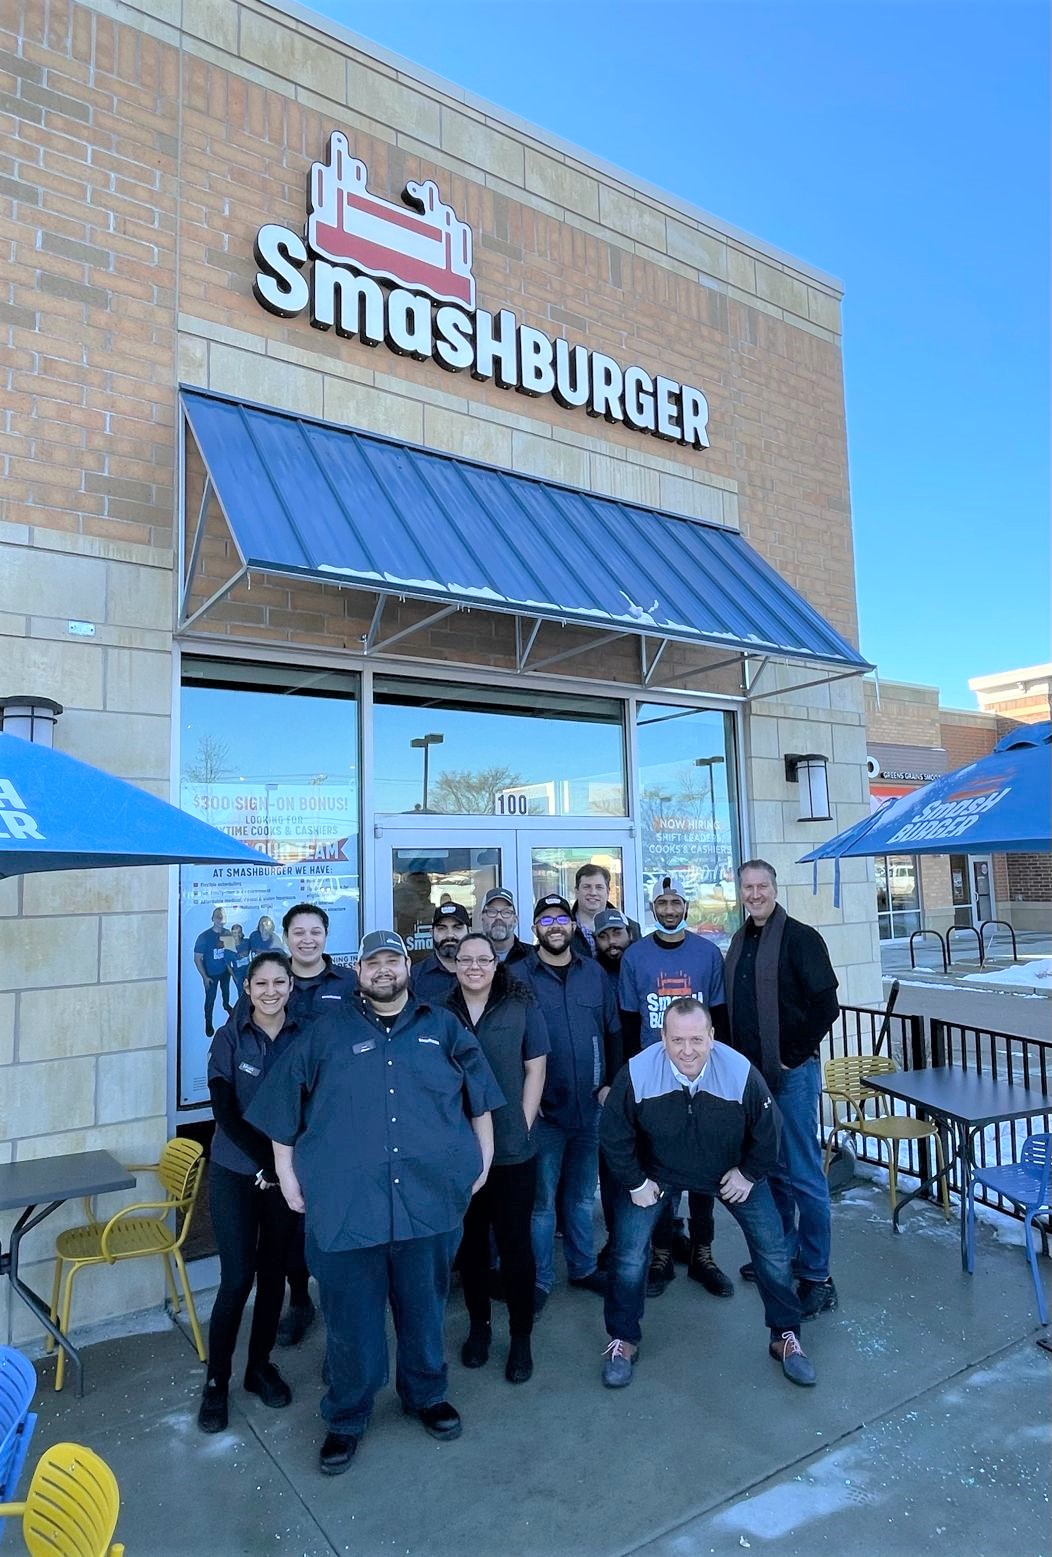 Phillips Edison & Co on X: "You're in for a SMASHING good time #Naperville Crossings with our newest Neighbors now open – welcome @Smashburger 🎉 As they continue their rapid expansion,